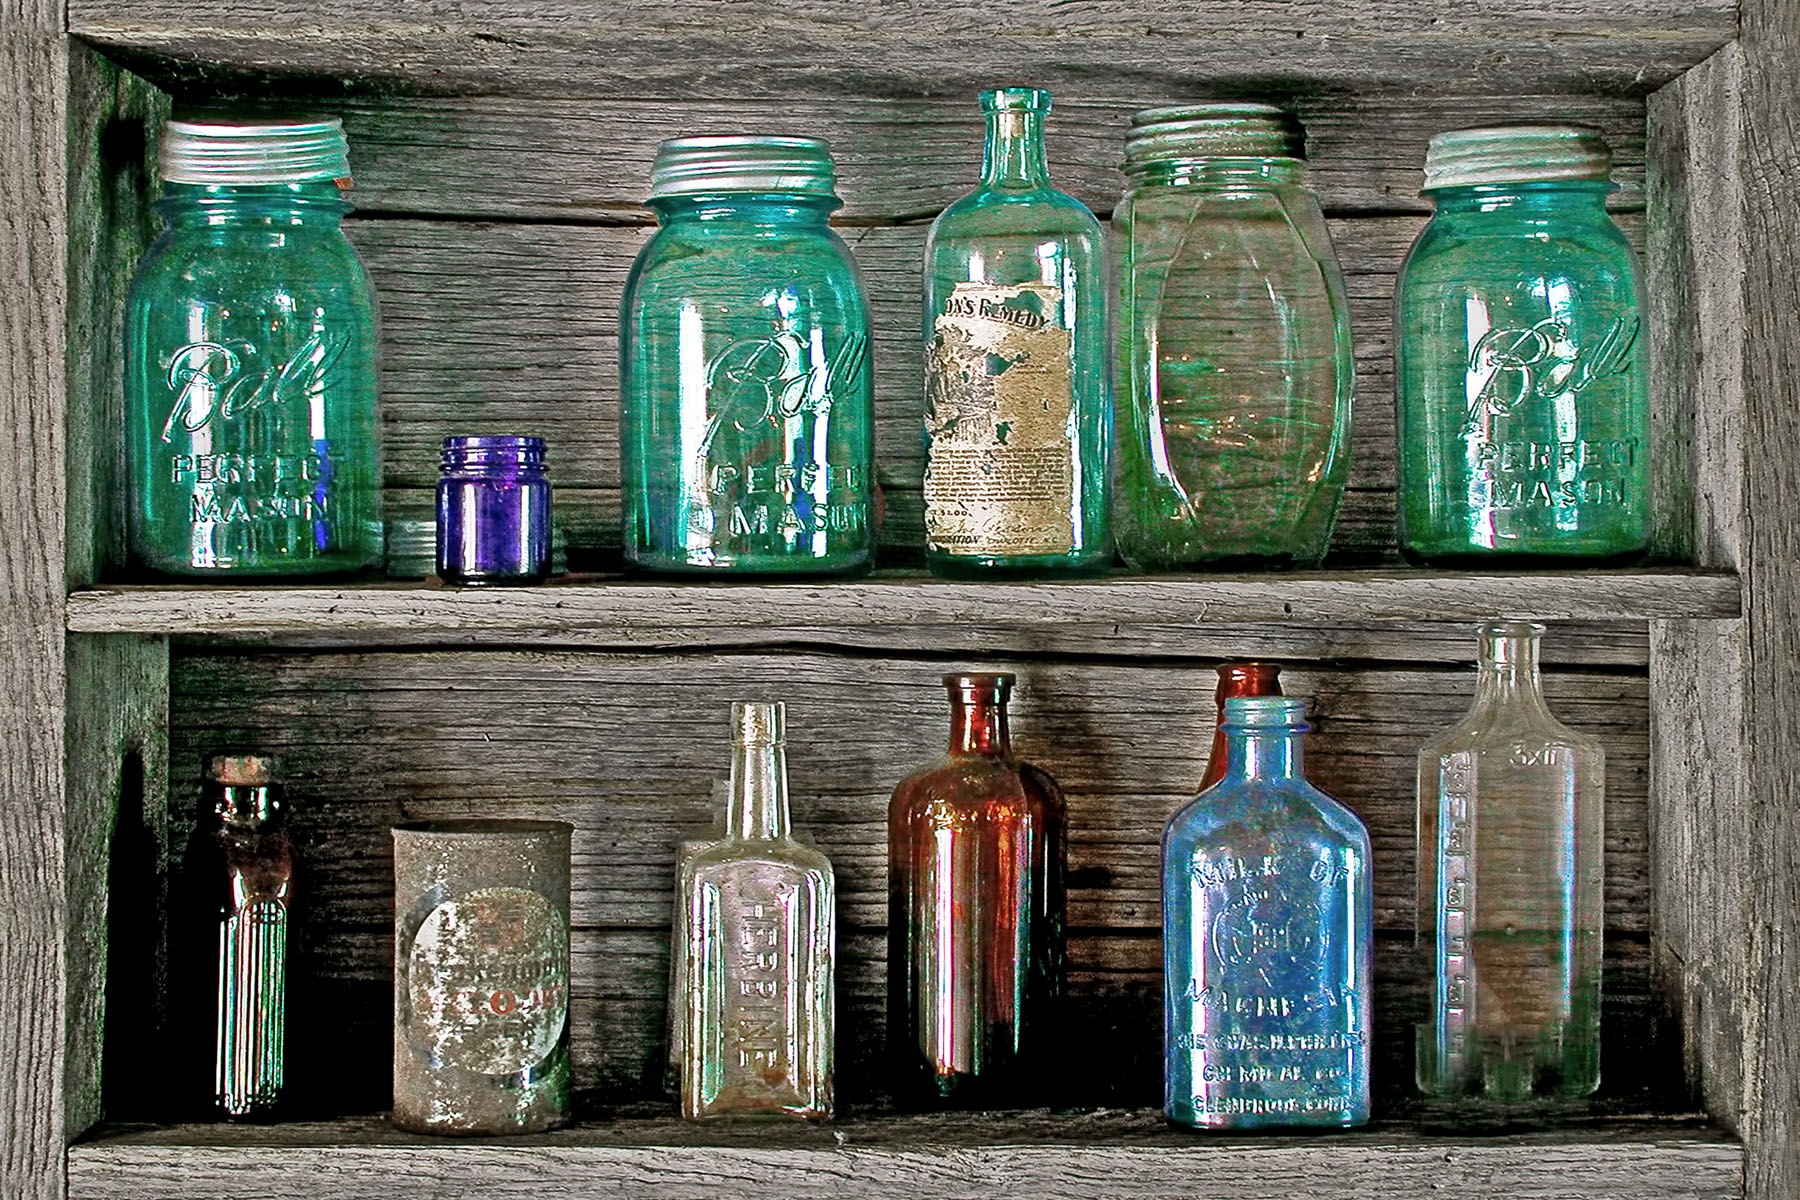 OLD JARS - These old jars were in a little museum in central Kentucky. I also photgraphed an old rocking chair in that same museum. You just never know.